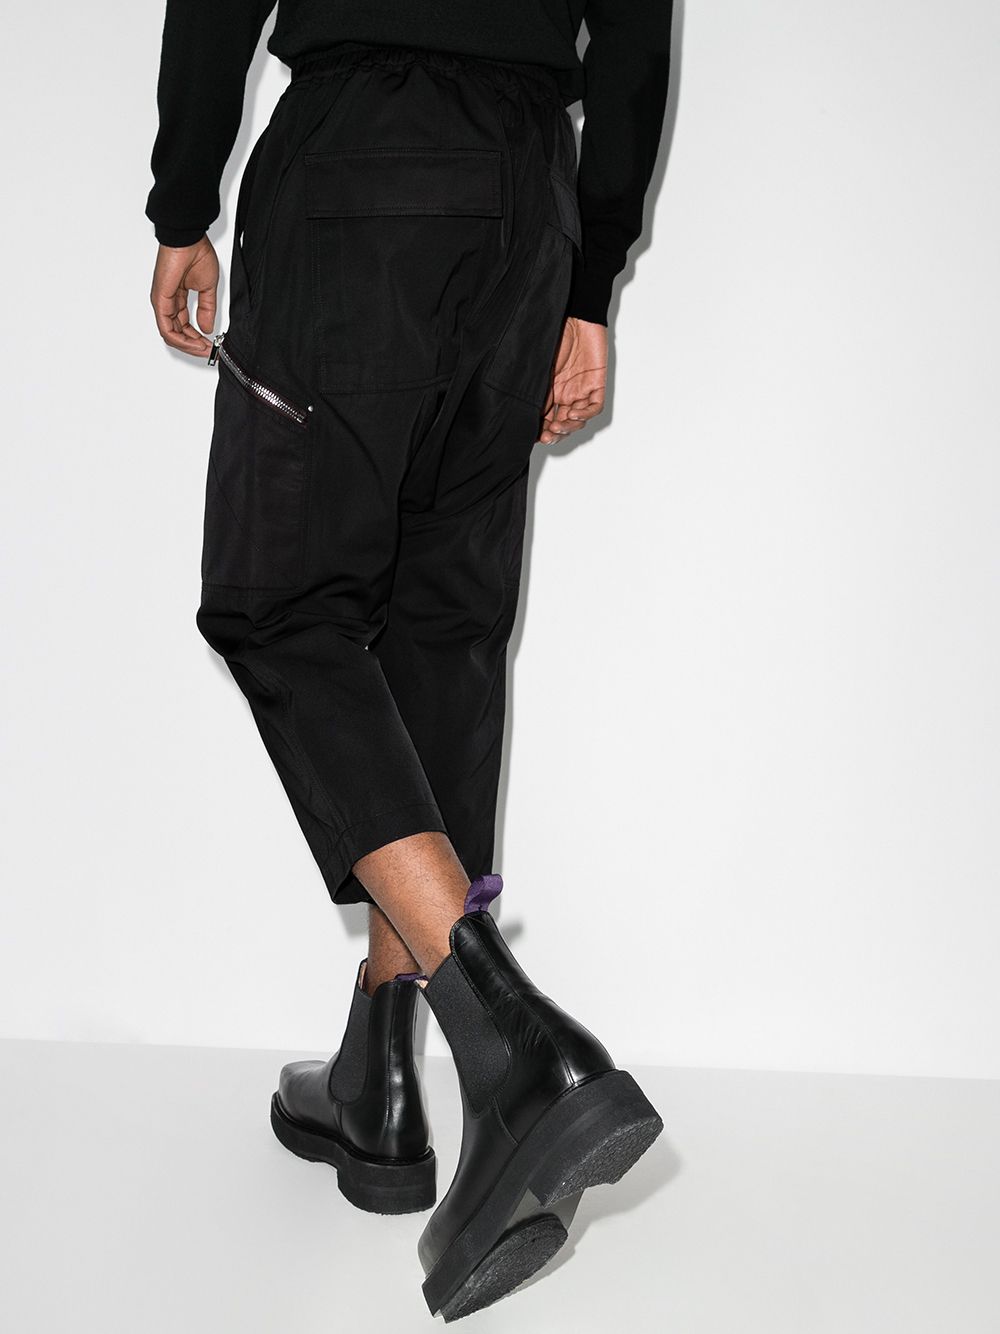 RickOwens FW Performa Cropped Pants